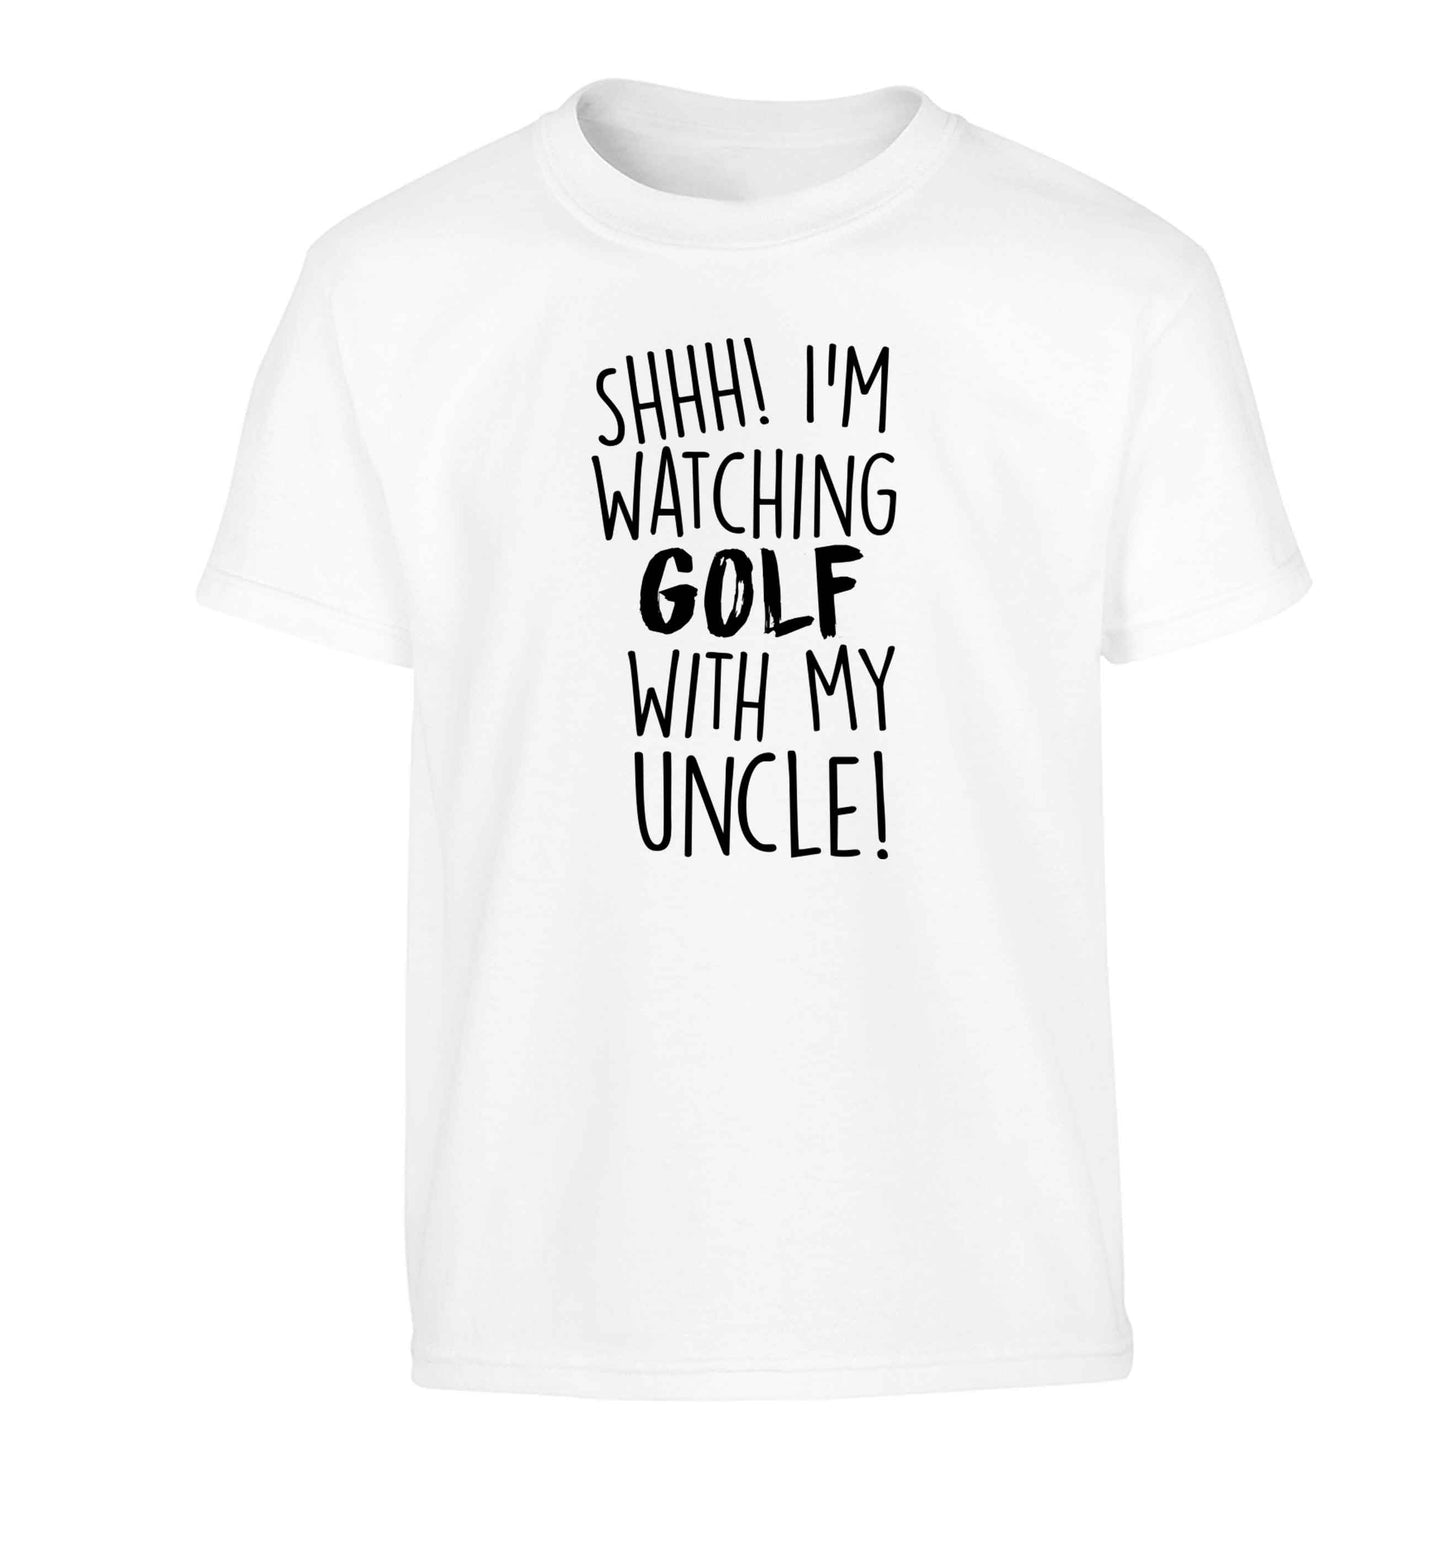 Shh I'm watching golf with my uncle Children's white Tshirt 12-13 Years